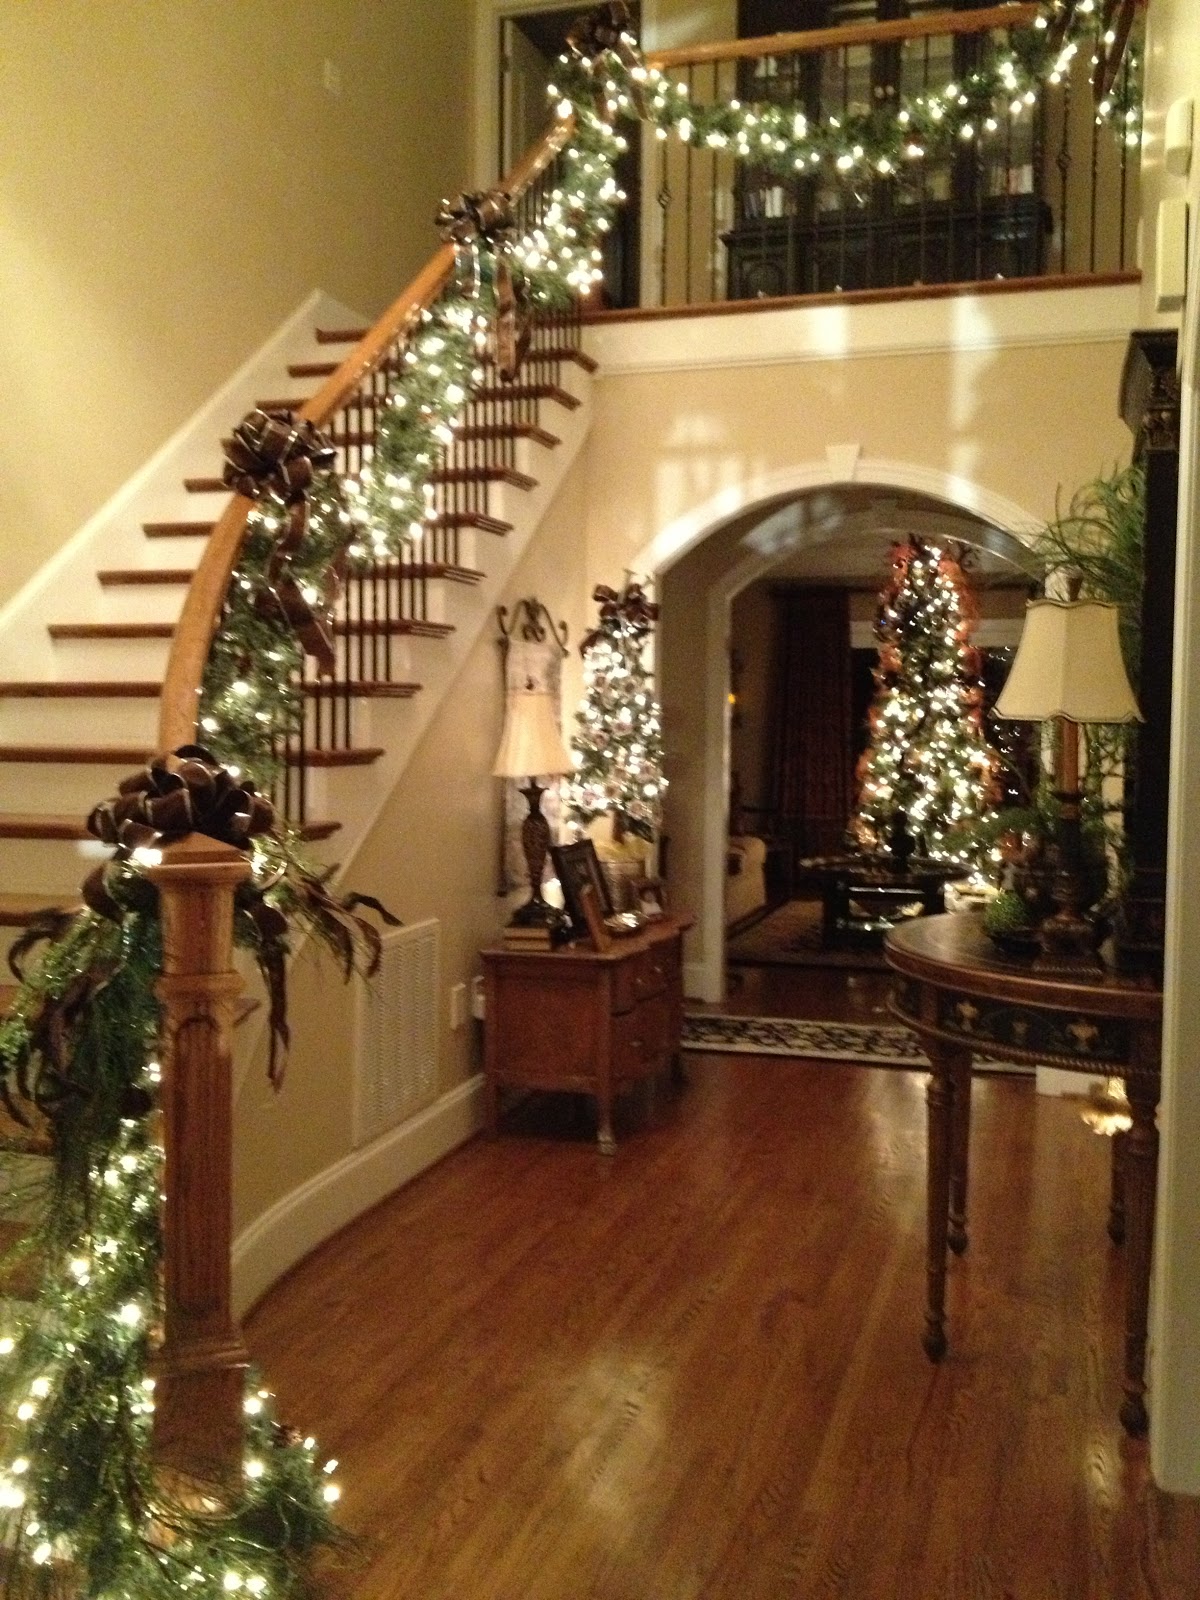 Decorated Christmas Garland with Lights